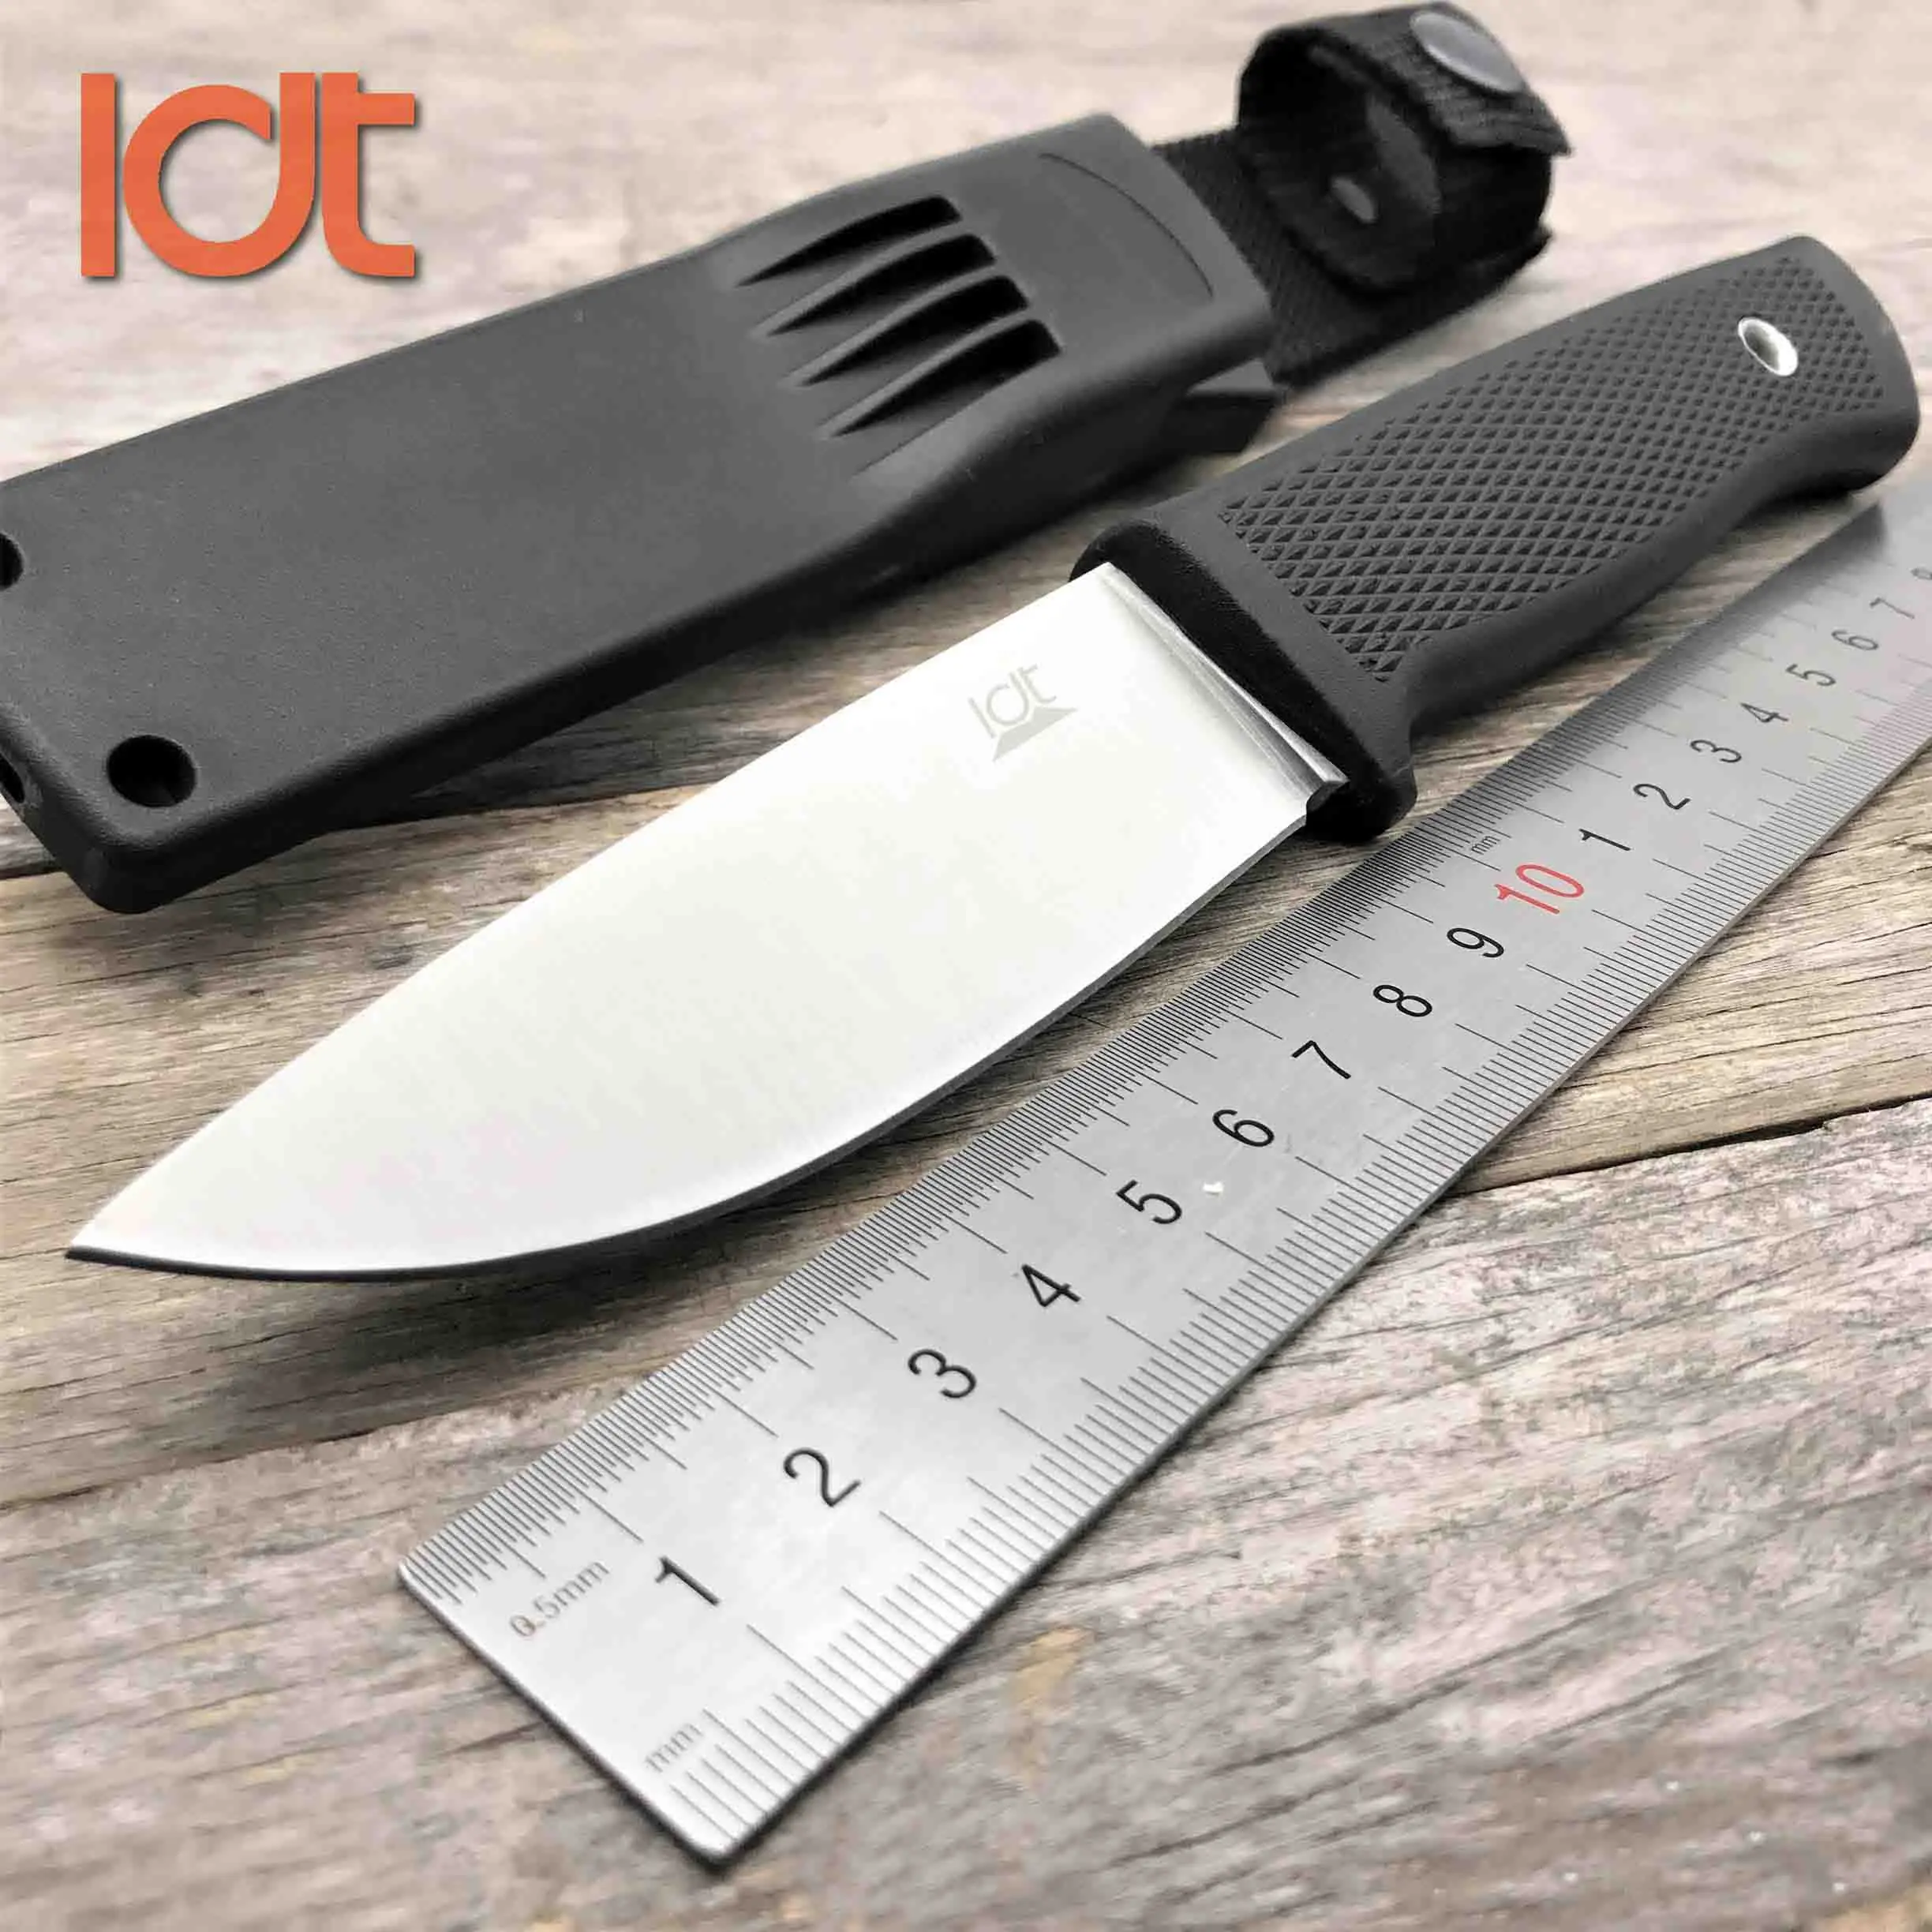 LDT F1 Camping knife VG10 Blade ABS Handle Outdoor Hunting Tactical Knives Folding military knife Survival Pocket EDC Tools - Цвет: F1